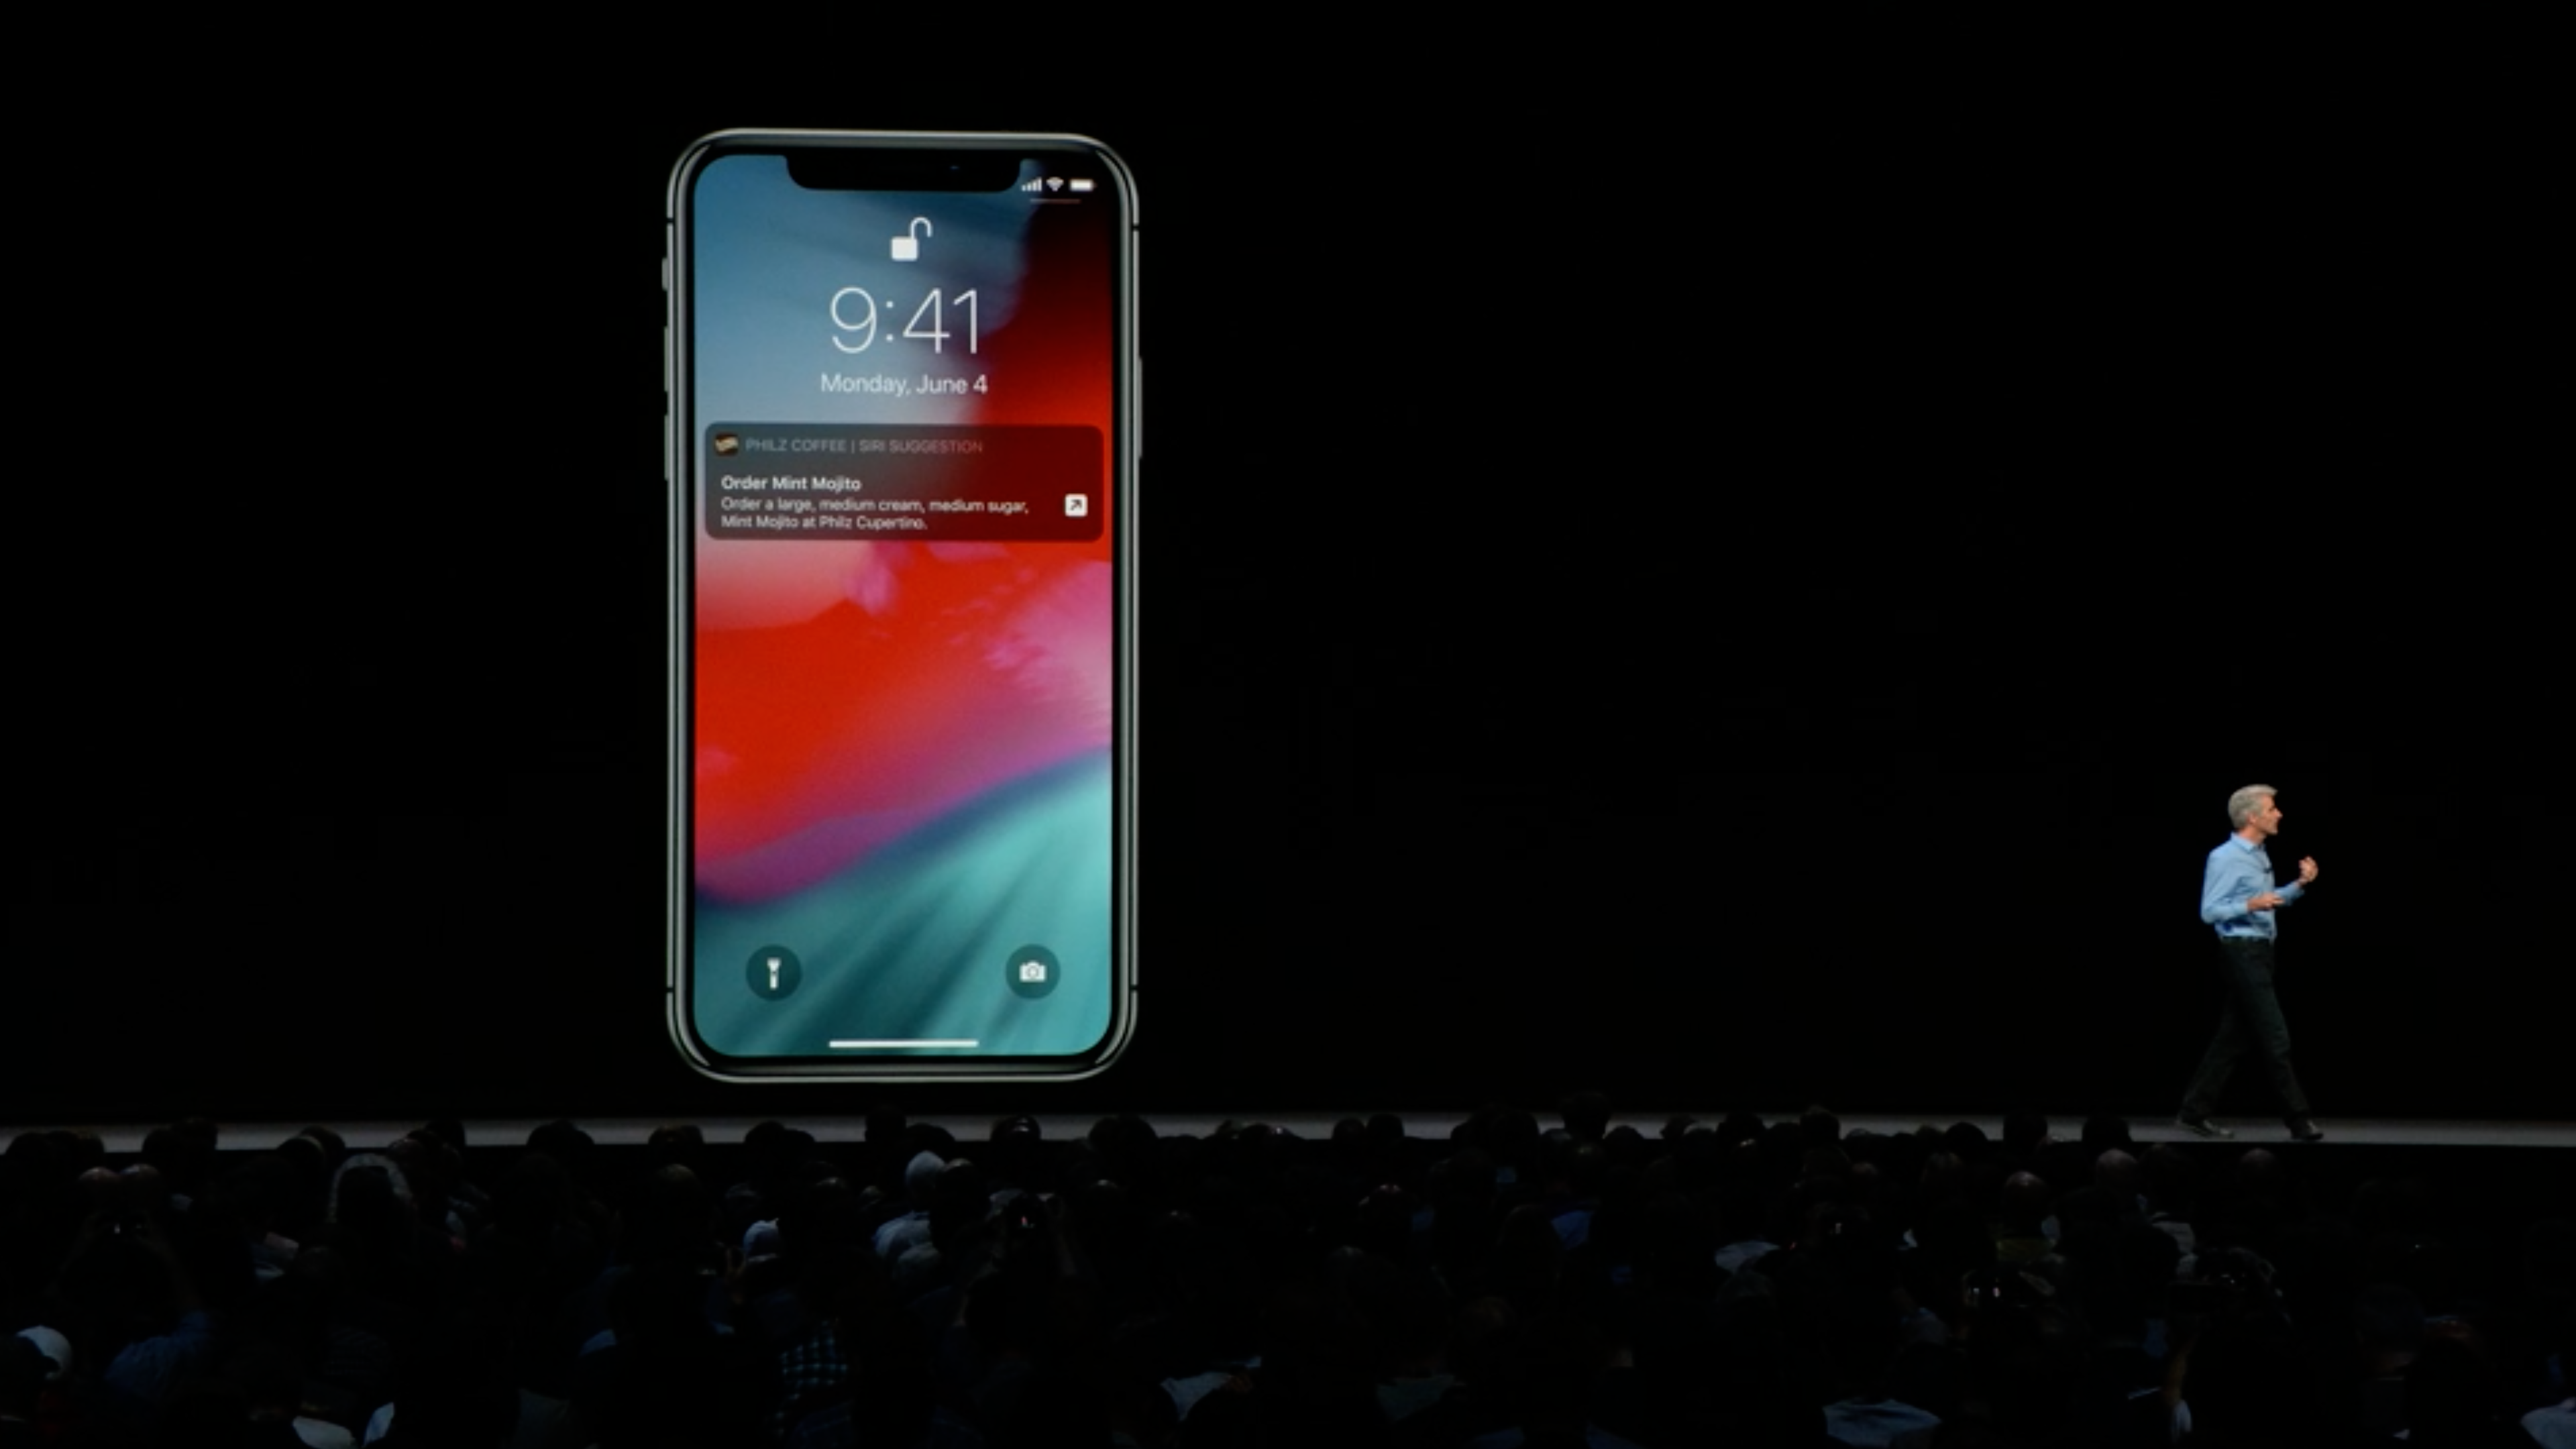 iOS 12 includes a colorful new wallpaper, download it here for iPhone and  iPad - 9to5Mac